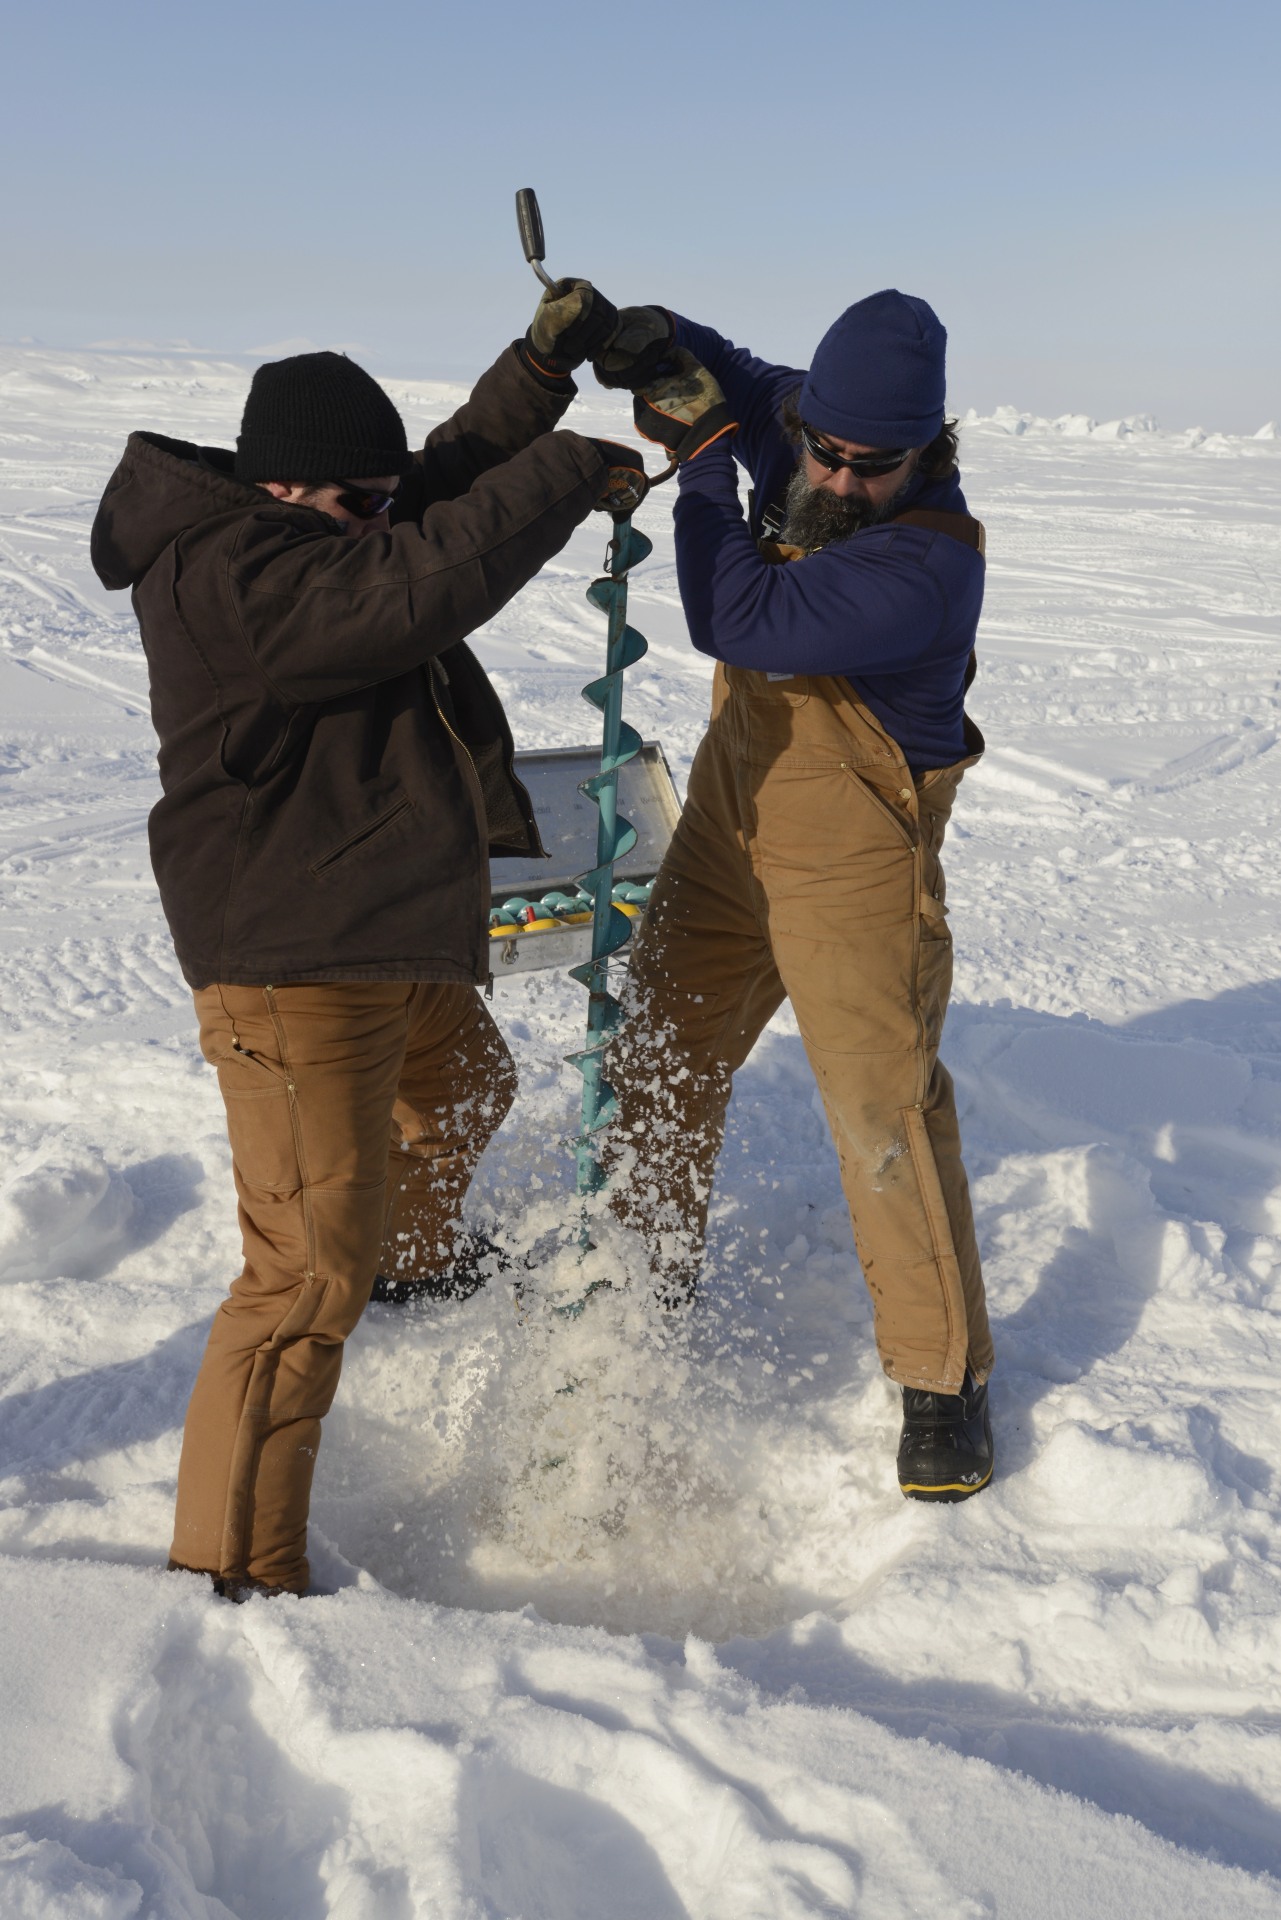 It takes a very long auger to drill through Arctic ice.
Photo by Janice Lang, DRDC